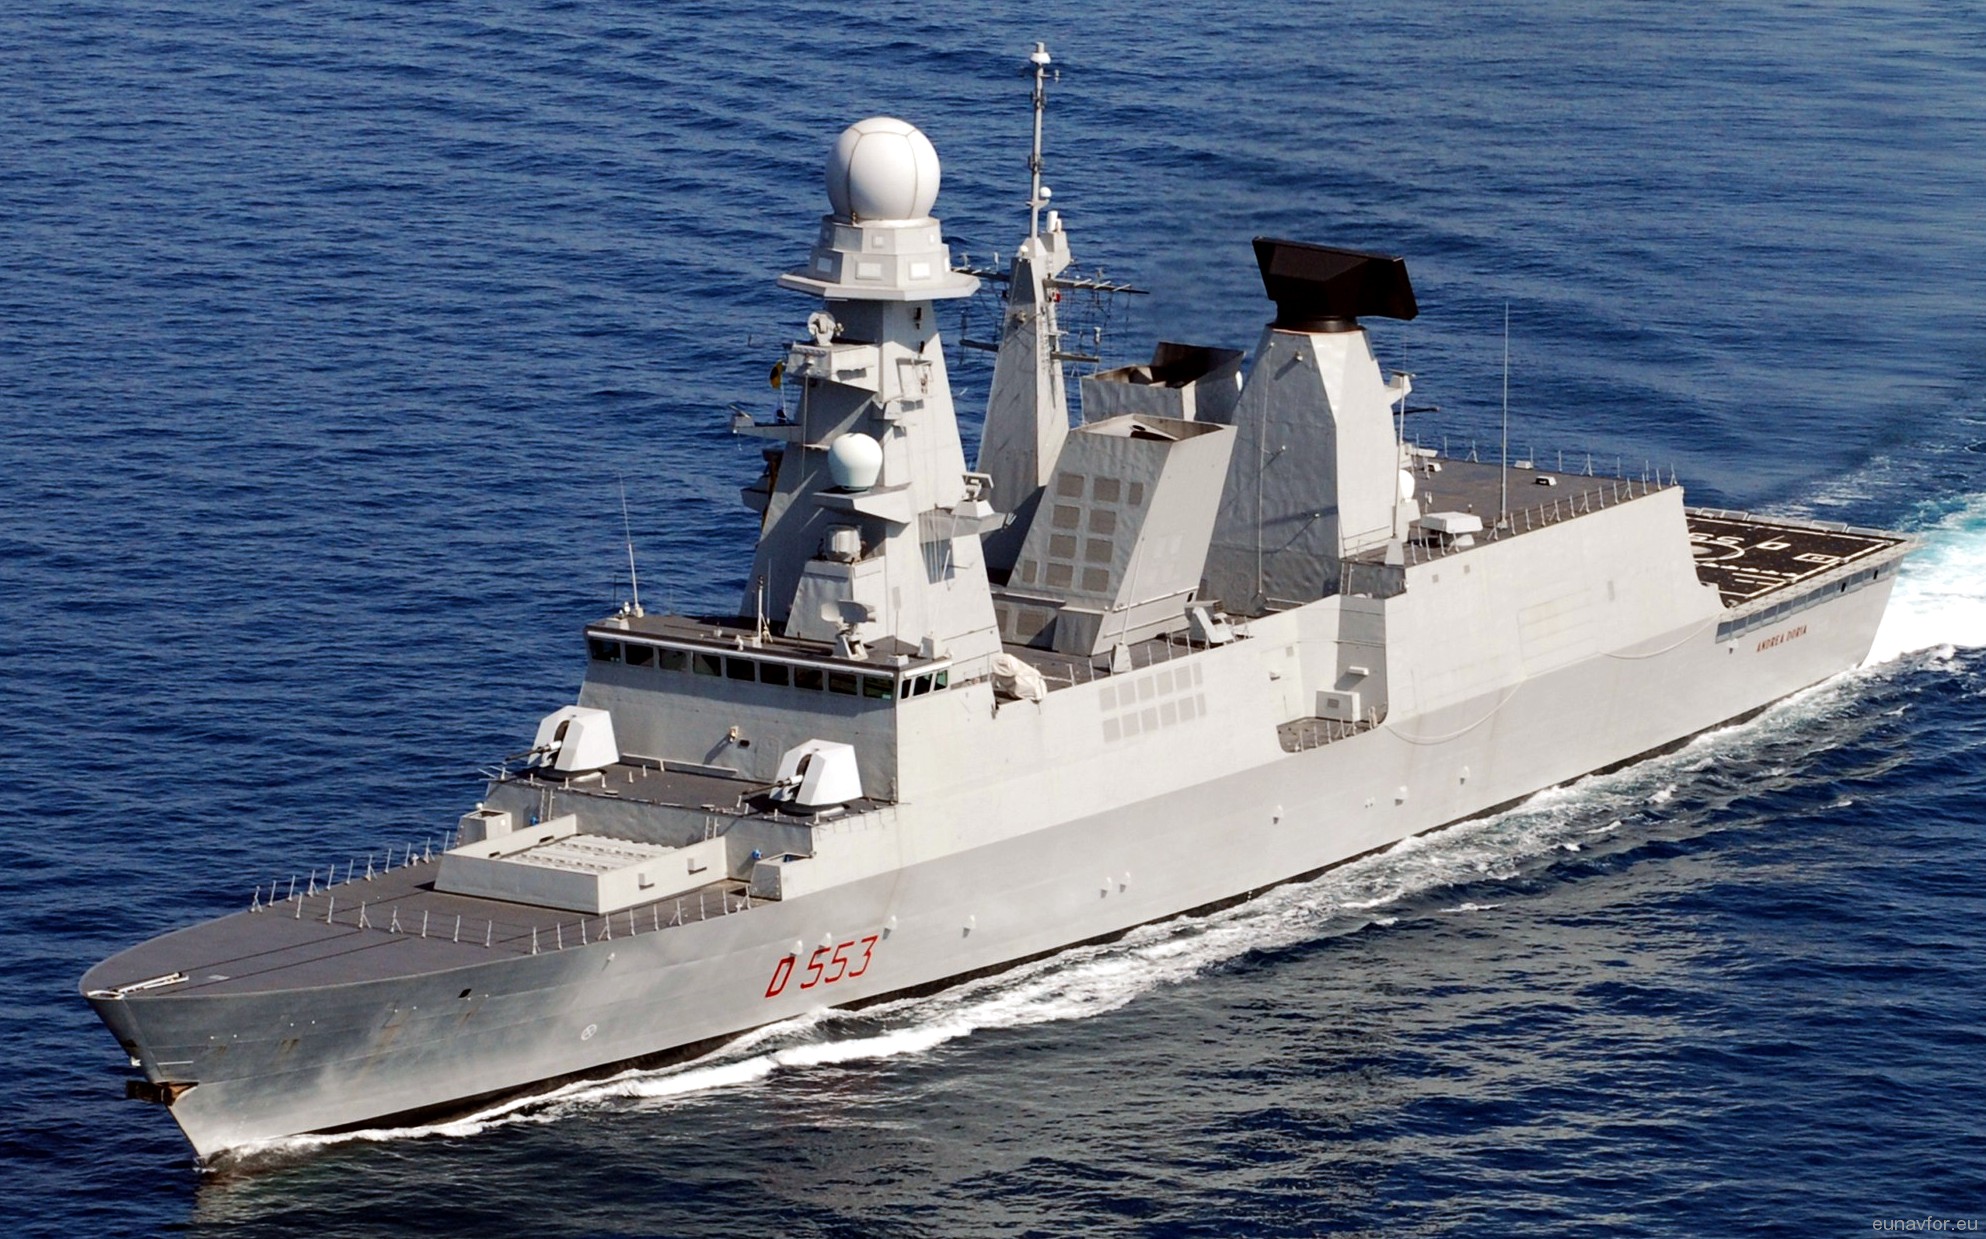 d-553 its andrea doria guided missile destroyer ddgh horizon class italian navy 07